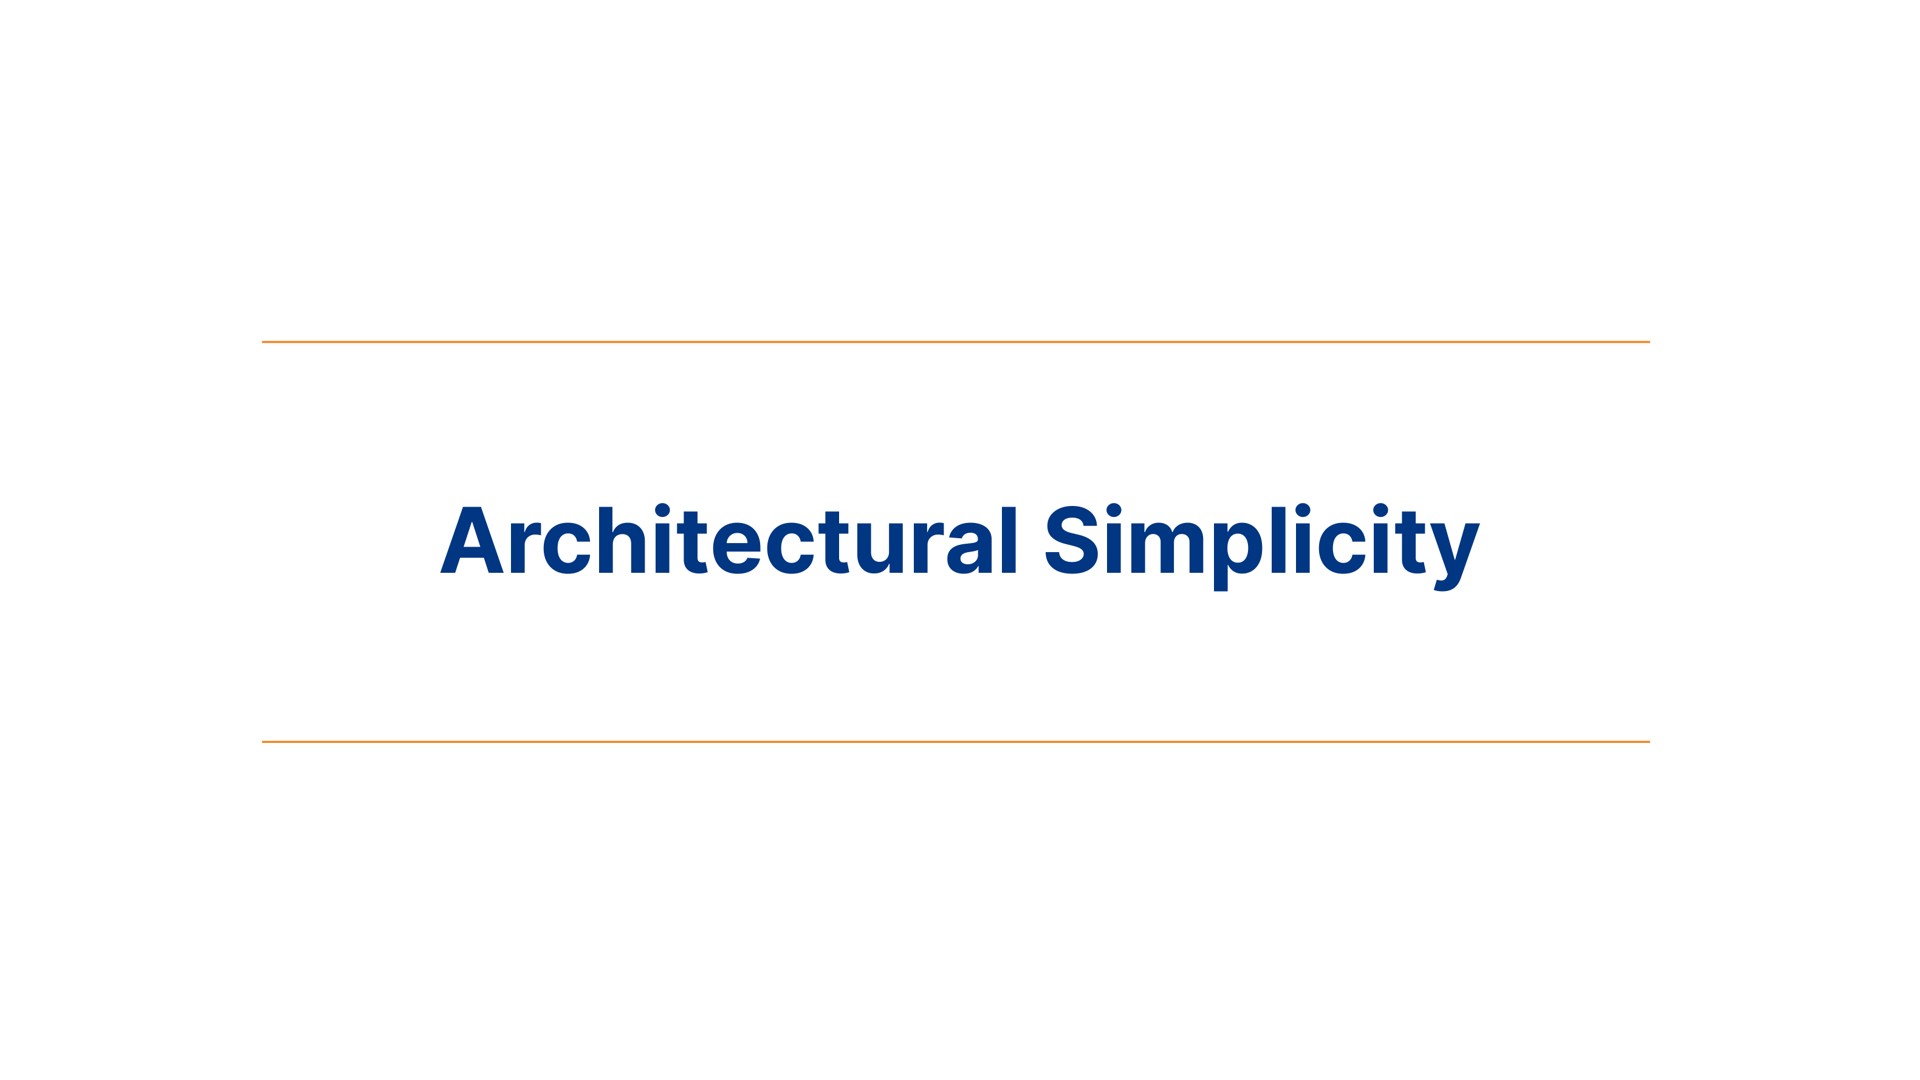 architectural simplicity | Cloudflare